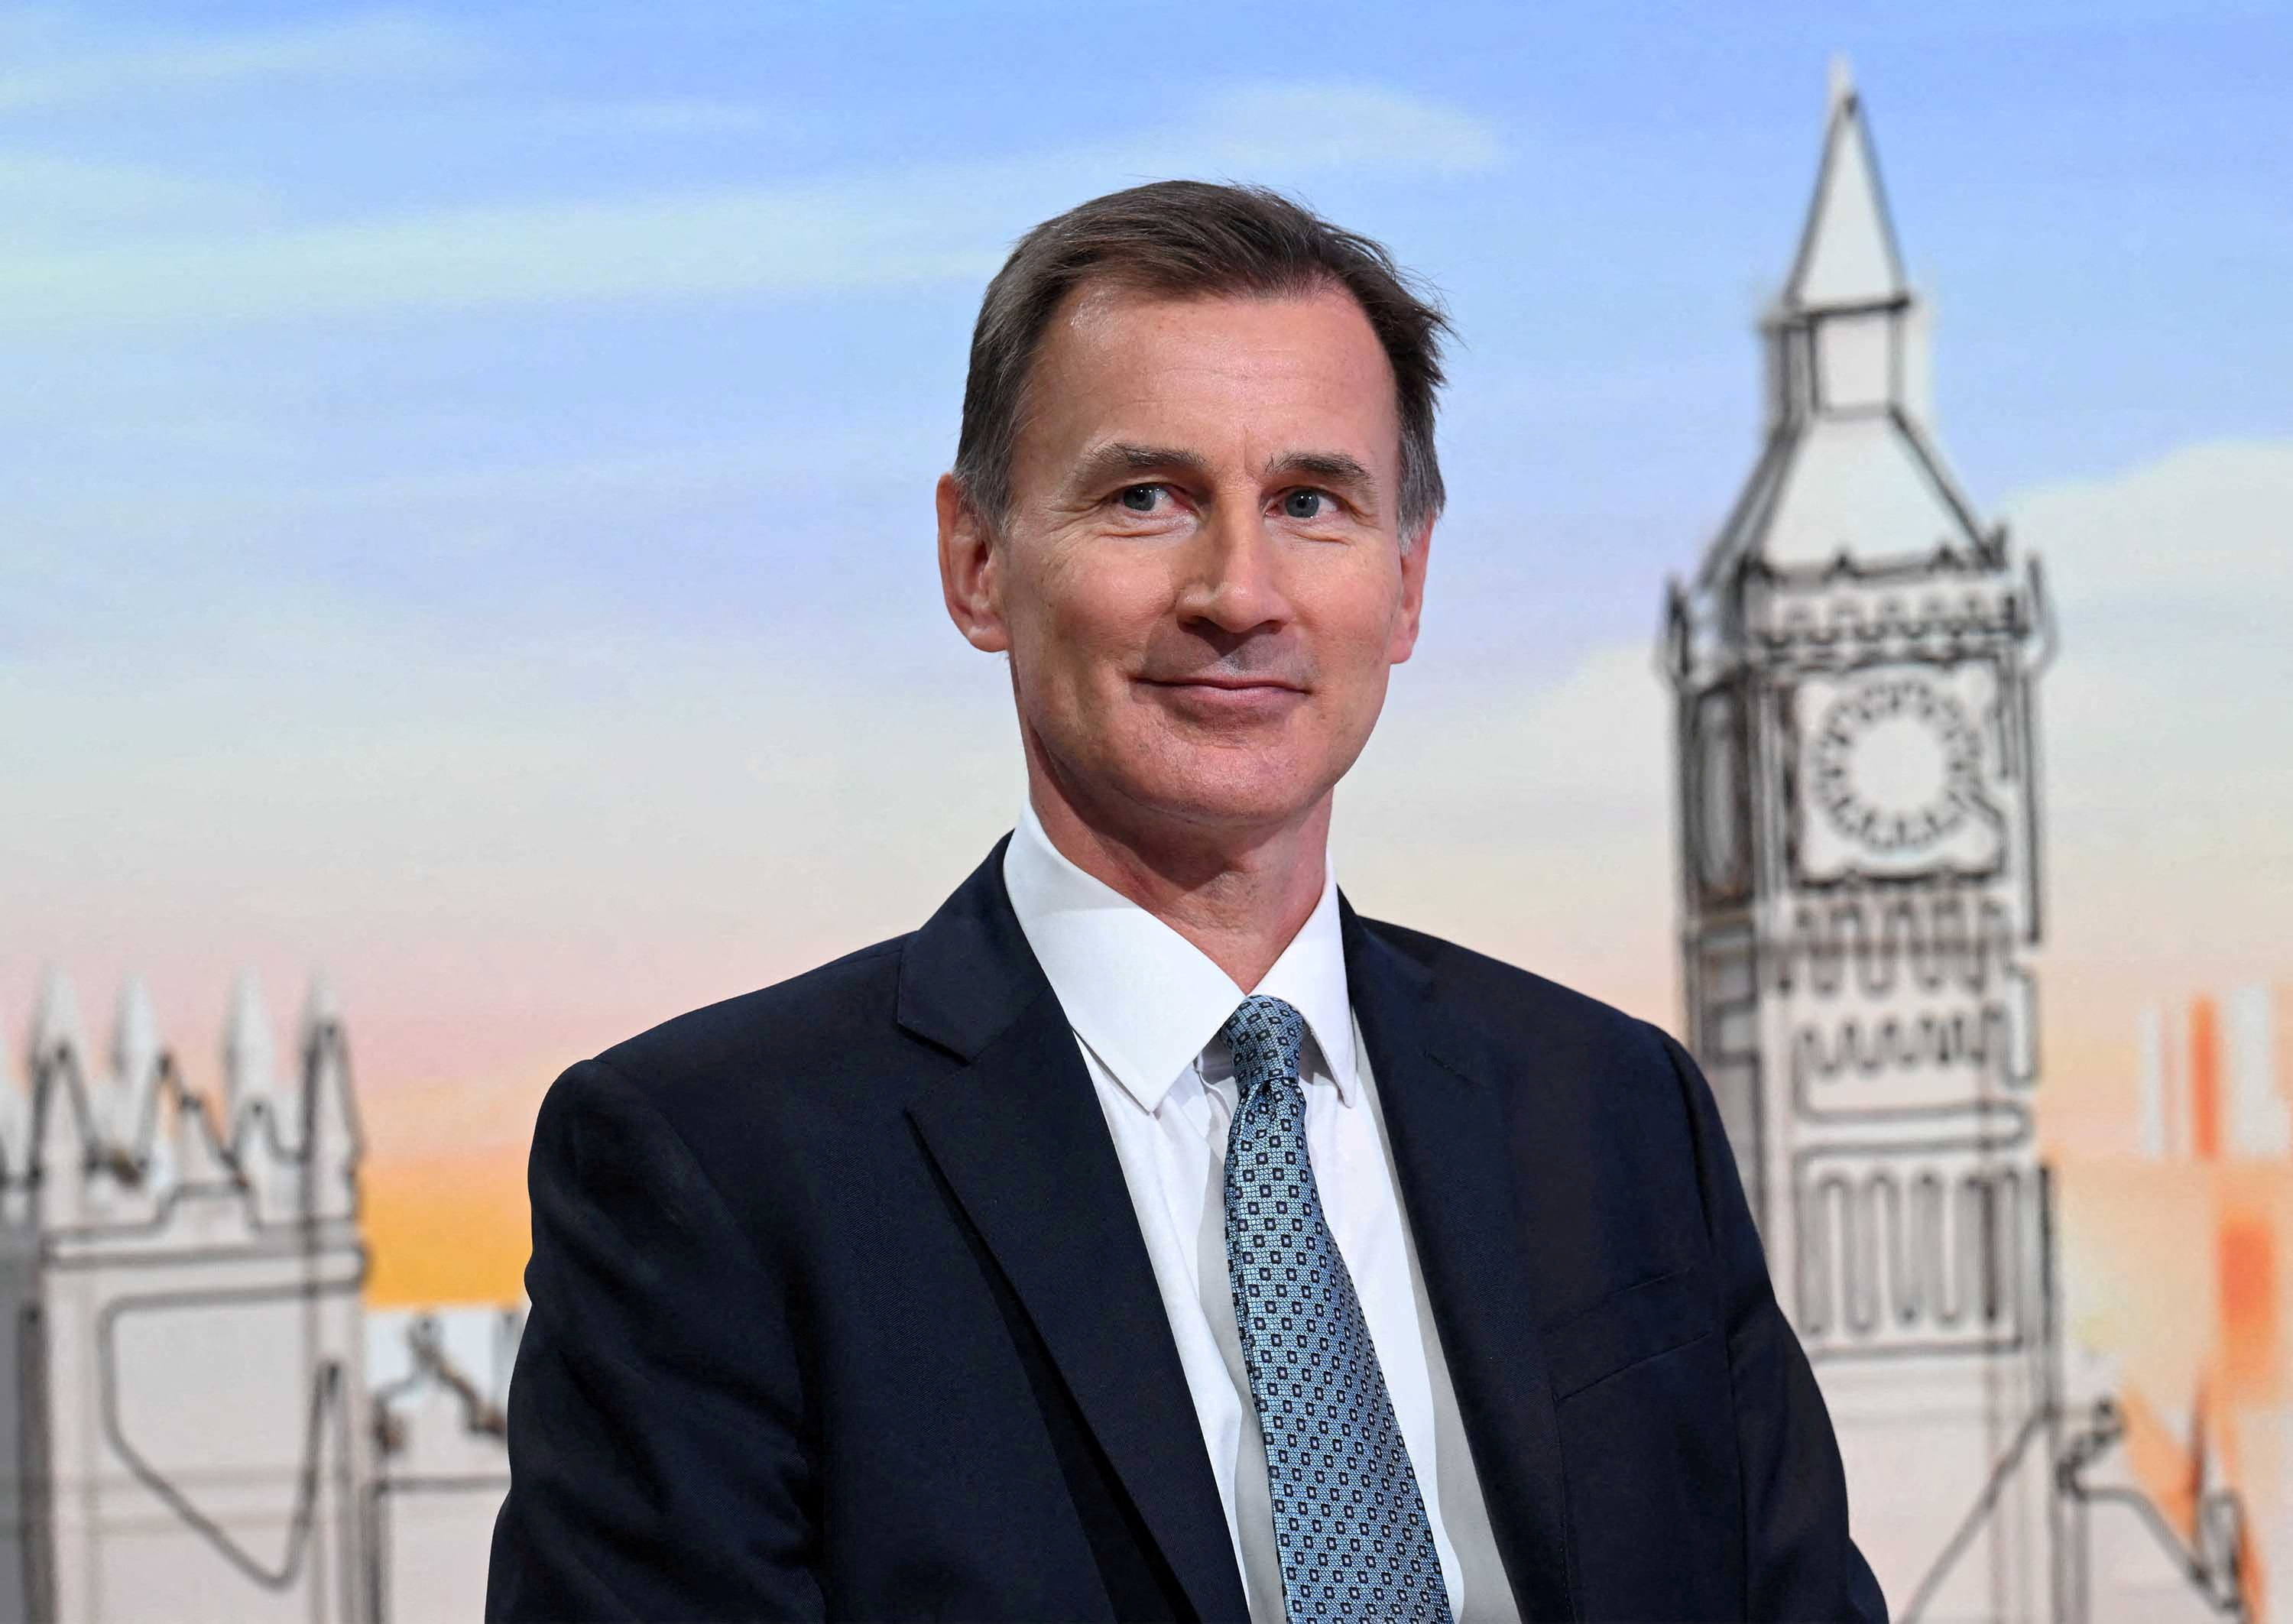 British Chancellor of the Exchequer Jeremy Hunt appears on BBC Sunday